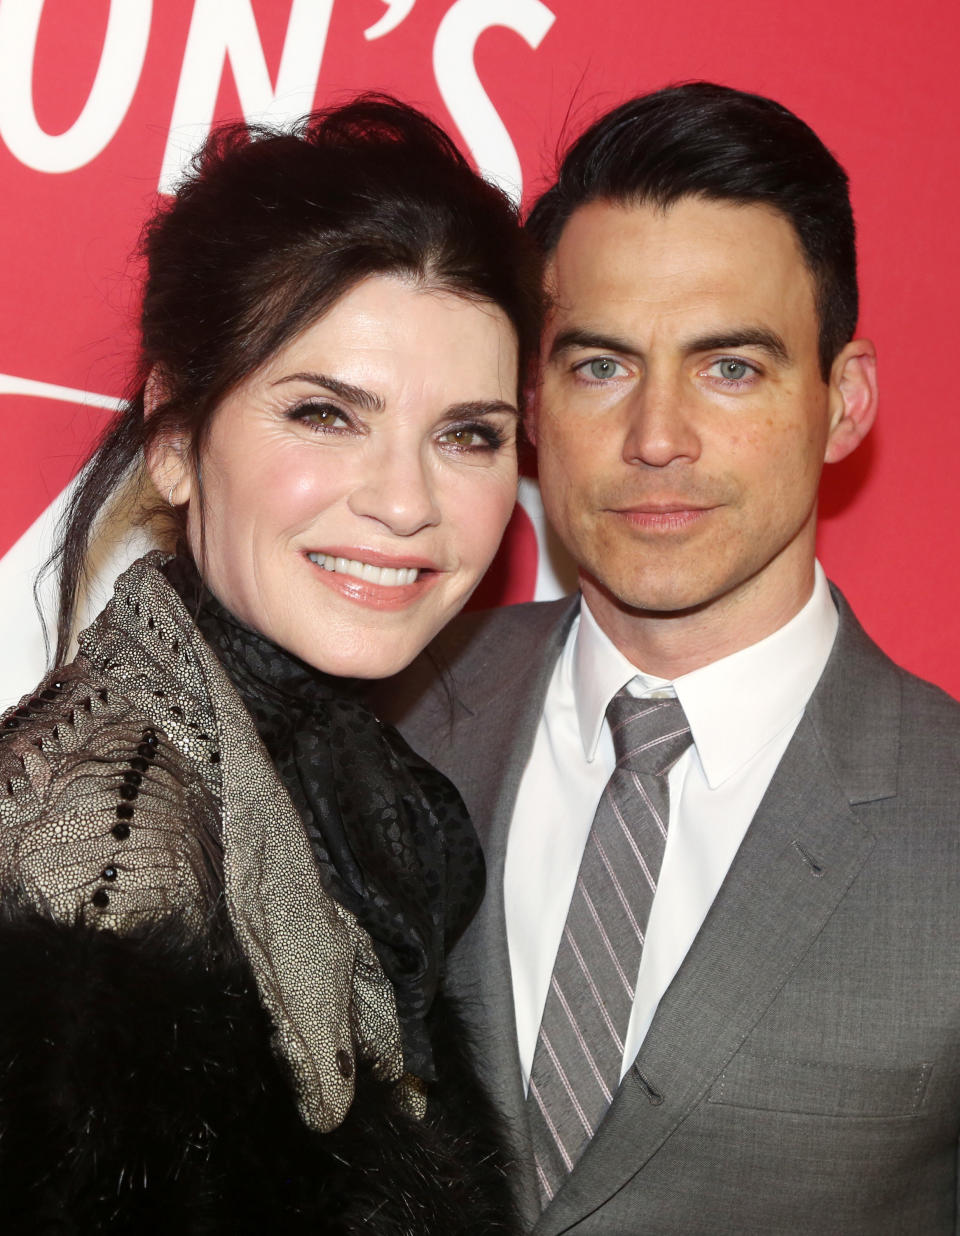 Julianna Margulies and Keith Lieberthal pose at the opening night of the Neil Simon play "Plaza Suite" on Broadway